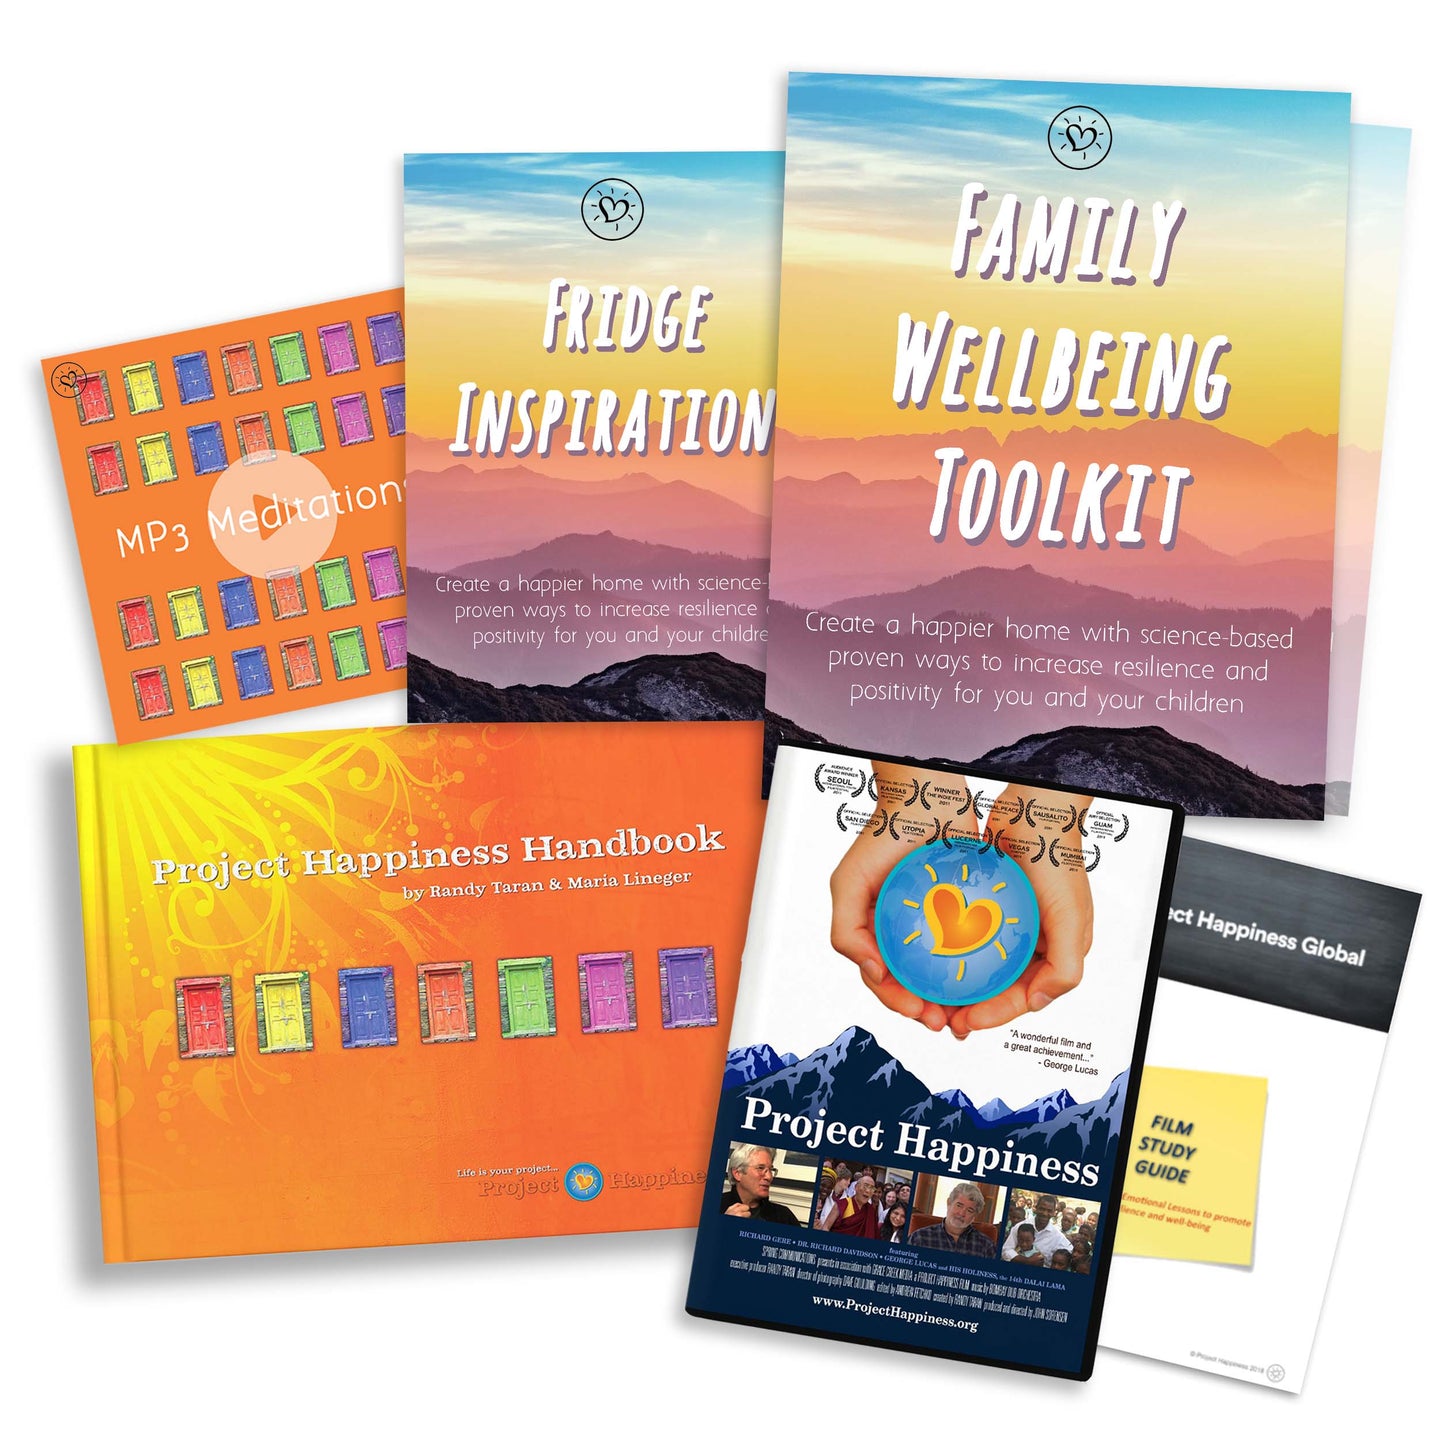 Family Wellbeing Toolkit